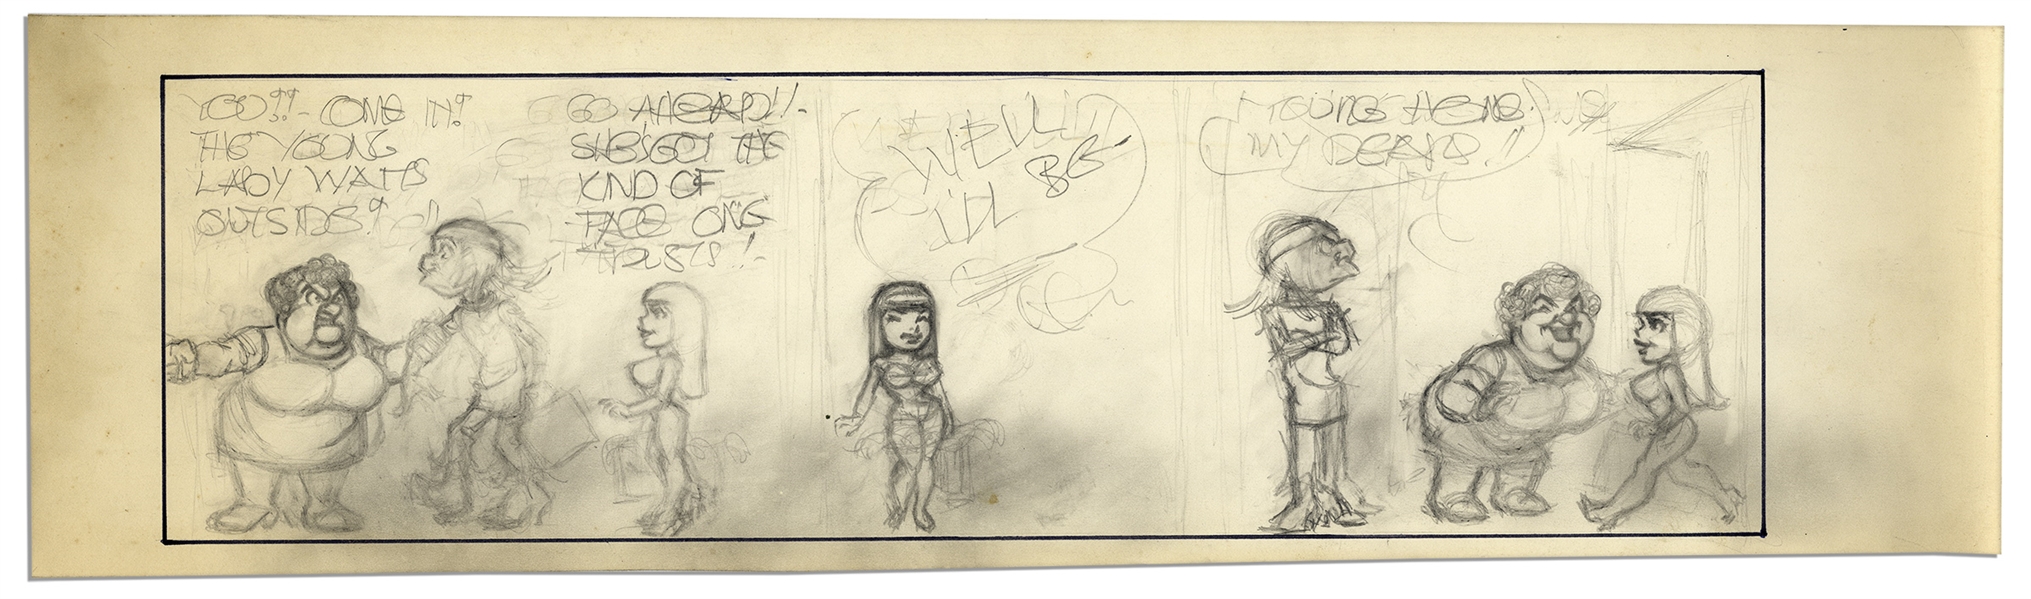 ''Li'l Abner'' Unfinished Comic Strip by Al Capp in Pencil -- Undated -- 23'' x 6.5'' -- Very Good Condition -- From the Al Capp Estate